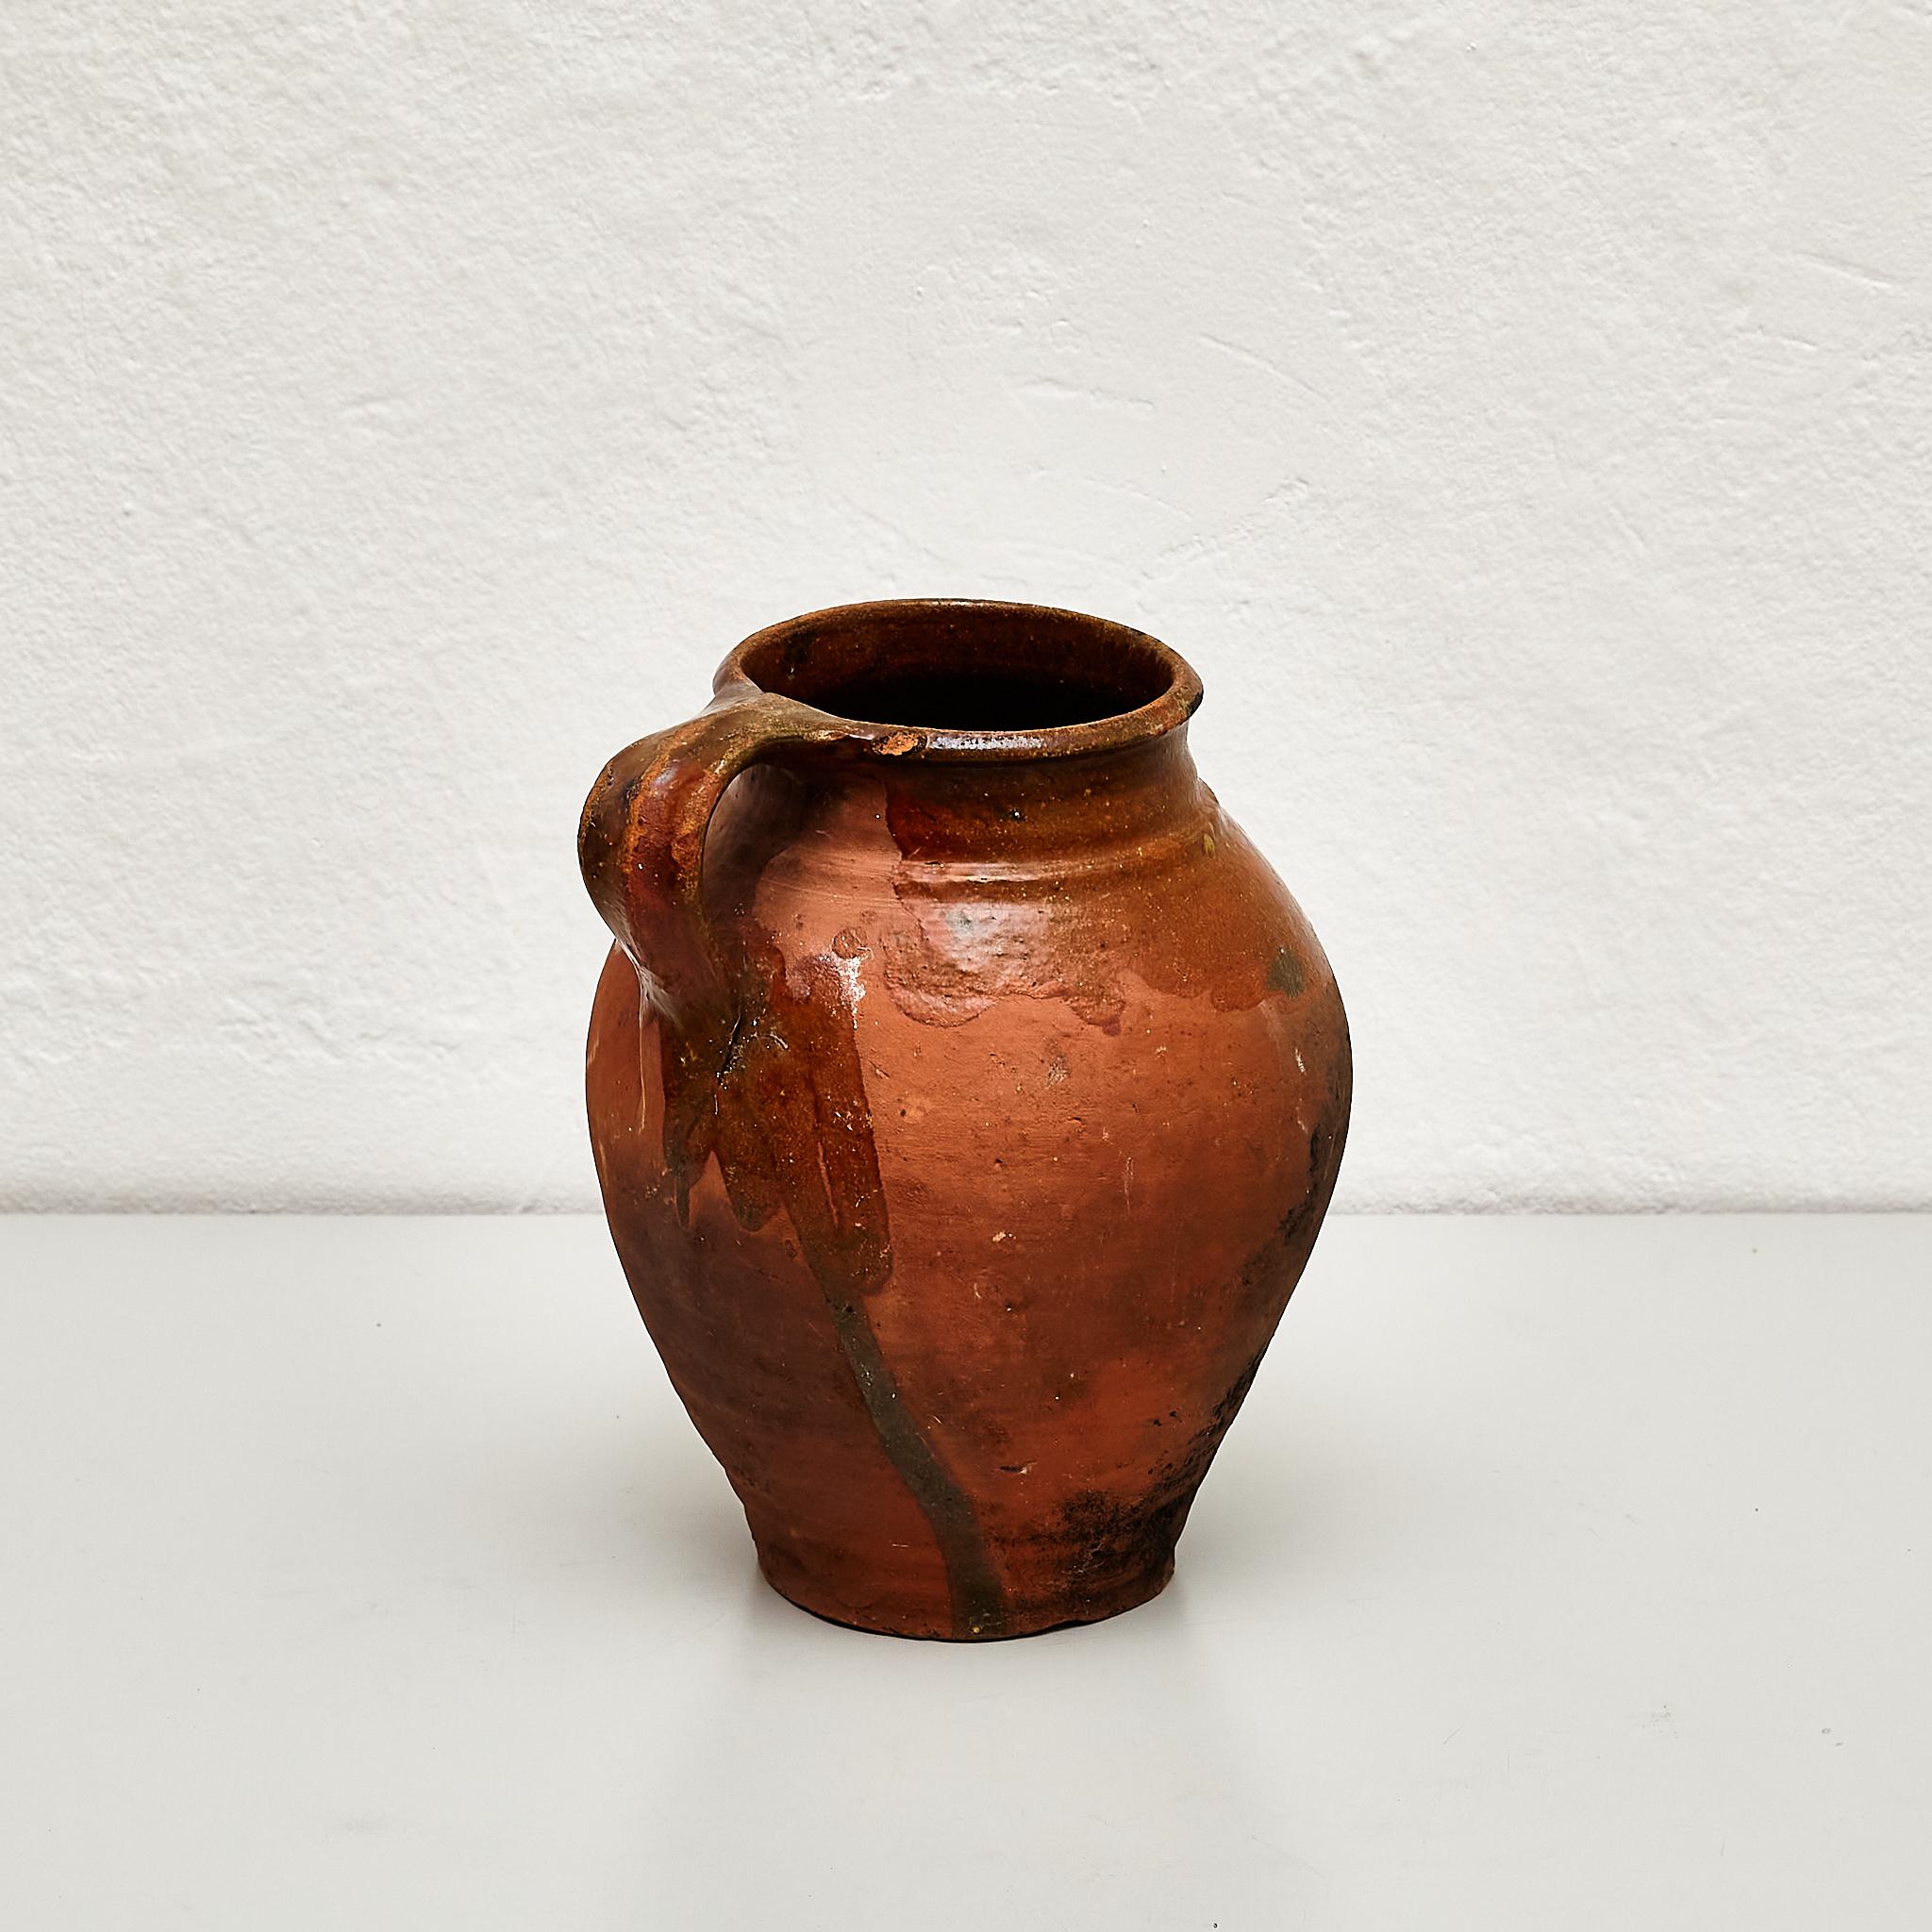 Early 20th century traditional Spanish ceramic vase.

Manufactured in Spain, early 20th century.

In original condition with minor wear consistent of age and use, preserving a beautiful patina.

Materials: 
Ceramic

Important information regarding